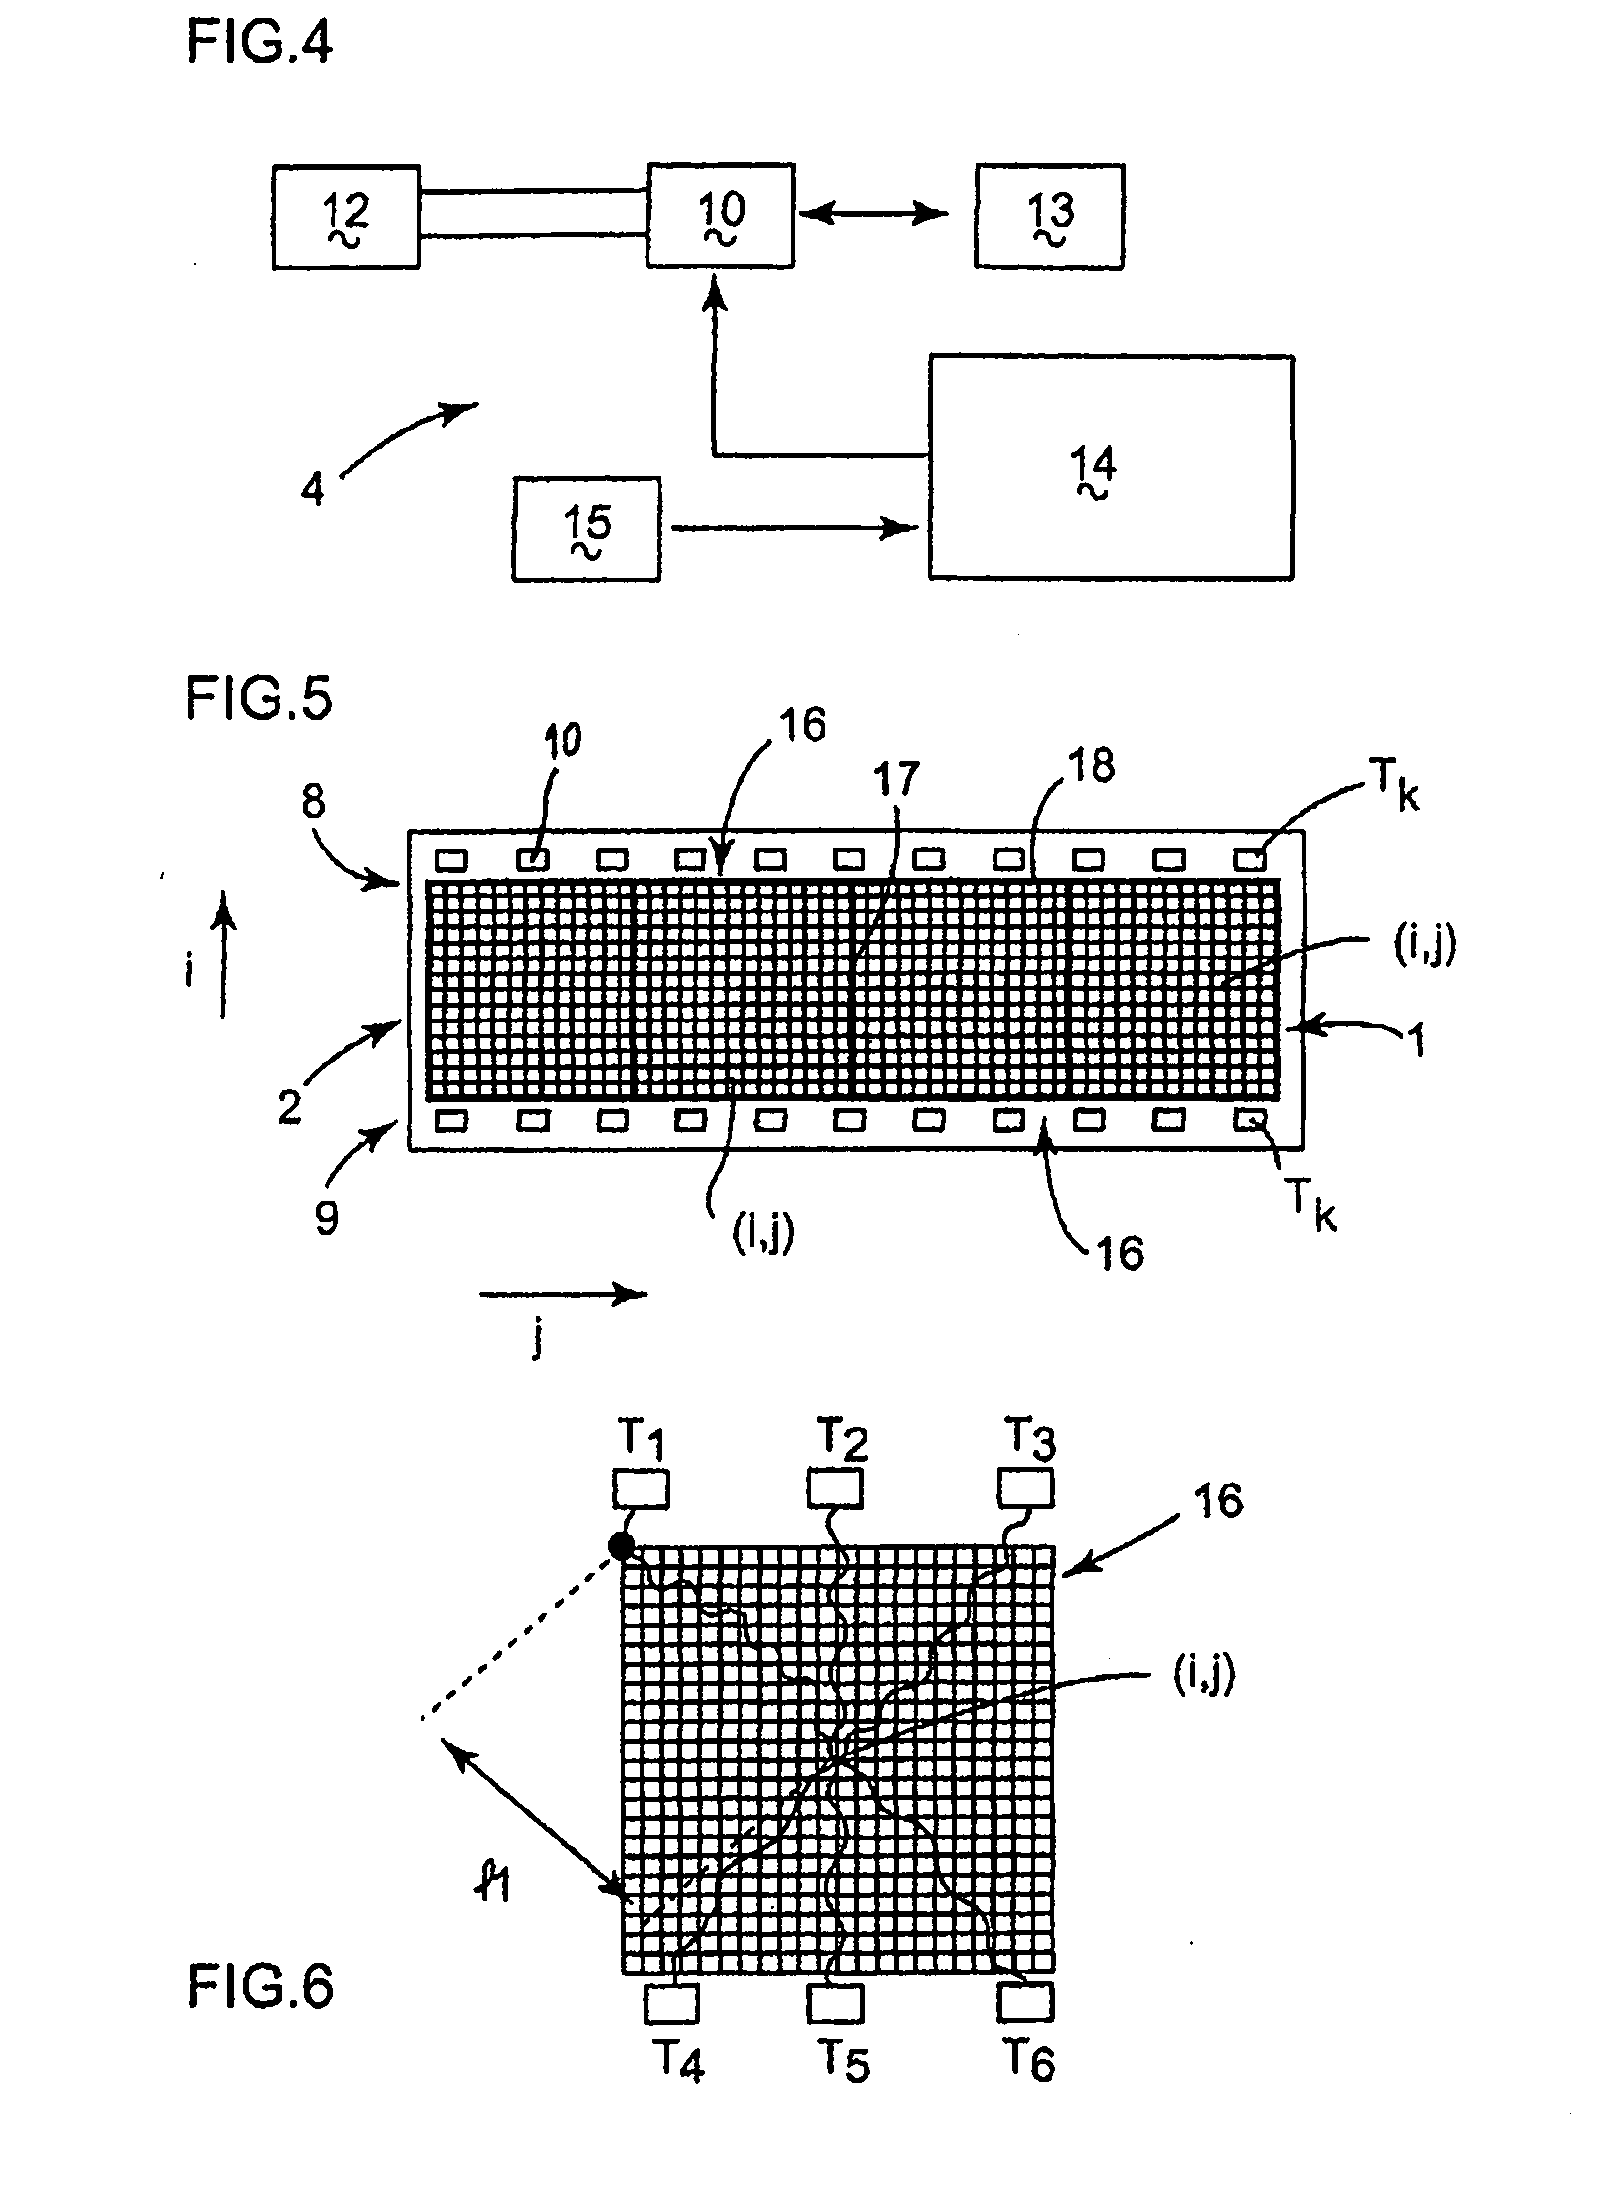 Anti-icing / de-icing system and method and aircraft structure incorporating this system